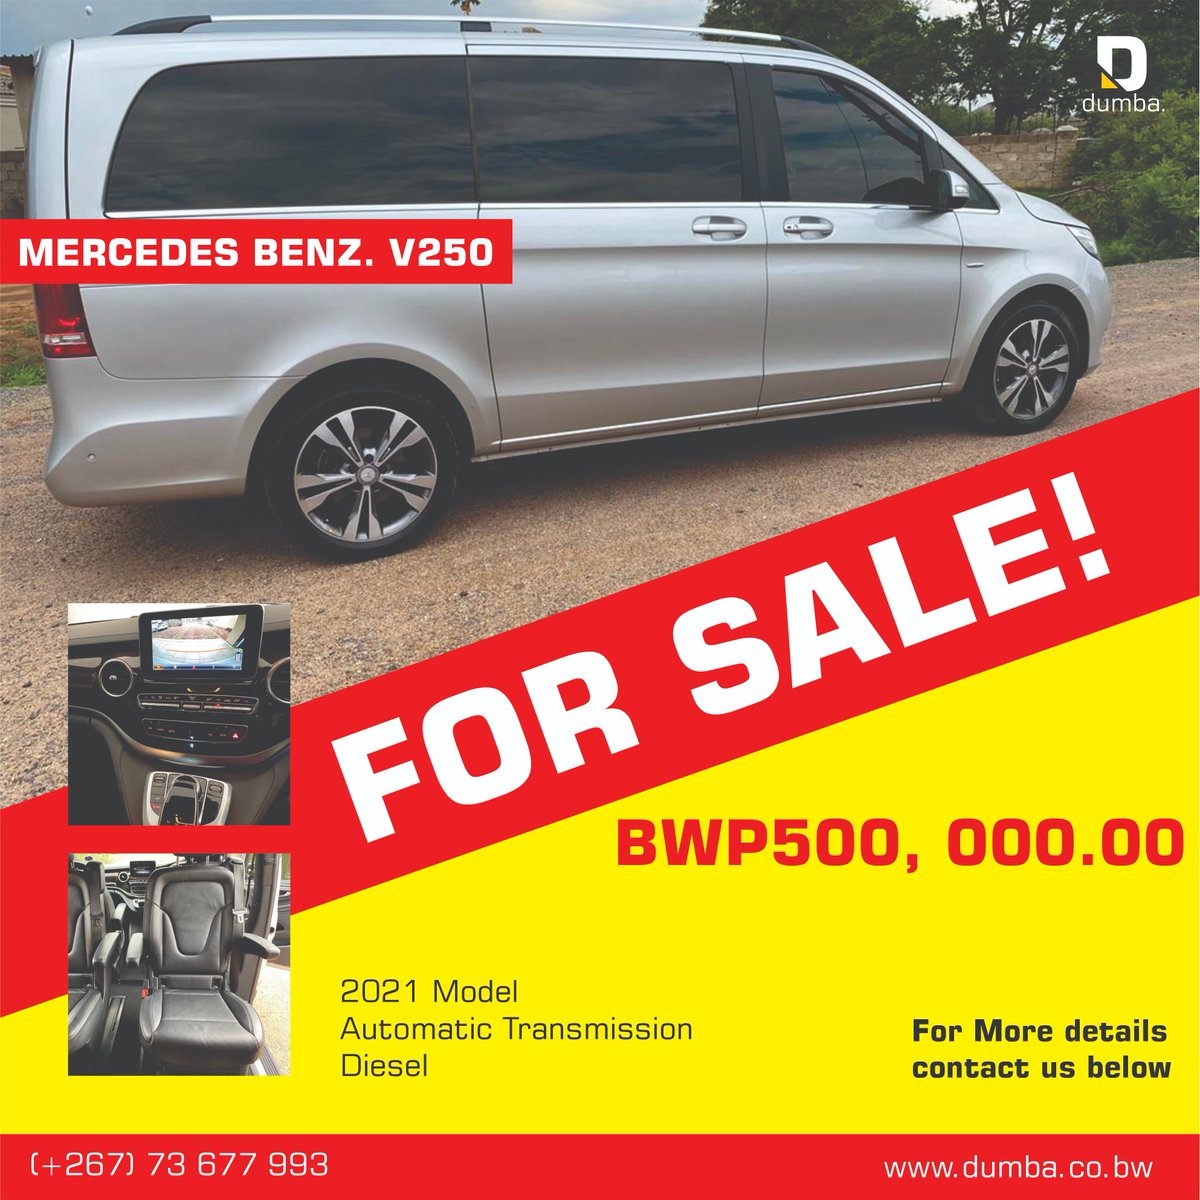 FOR SALE
Mercedes Benz V250
2021 edition
Automatic Transmission
Diesel

Still in mint condition. Just fuel and Drive. DUMBA CAR SALES

#DUMBA #car #sales #DriveSouthAfrica #BWgovernment #mercedesbenz #forsale #DriveDumba #siyathembana #cmtv